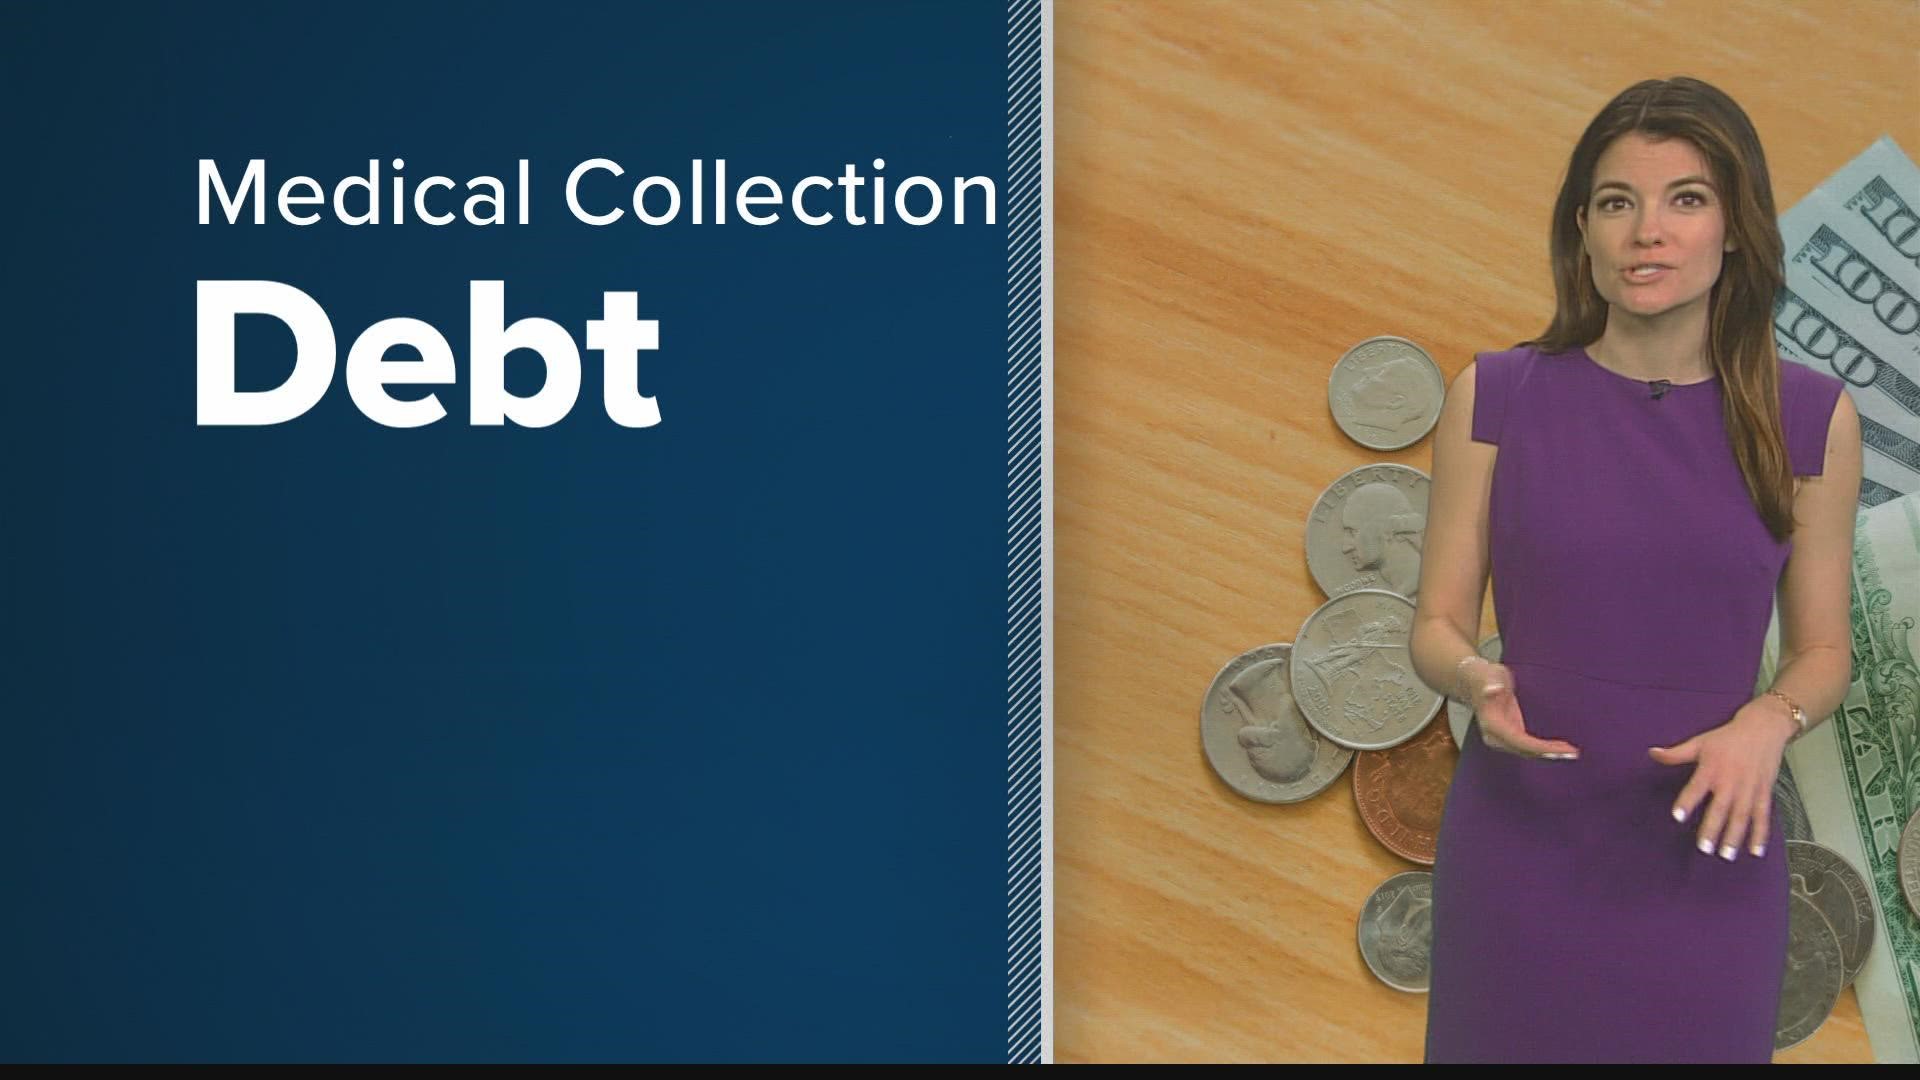 Our Allison Gormly has the latest on medical collection debt, and how it could be handled in the future.